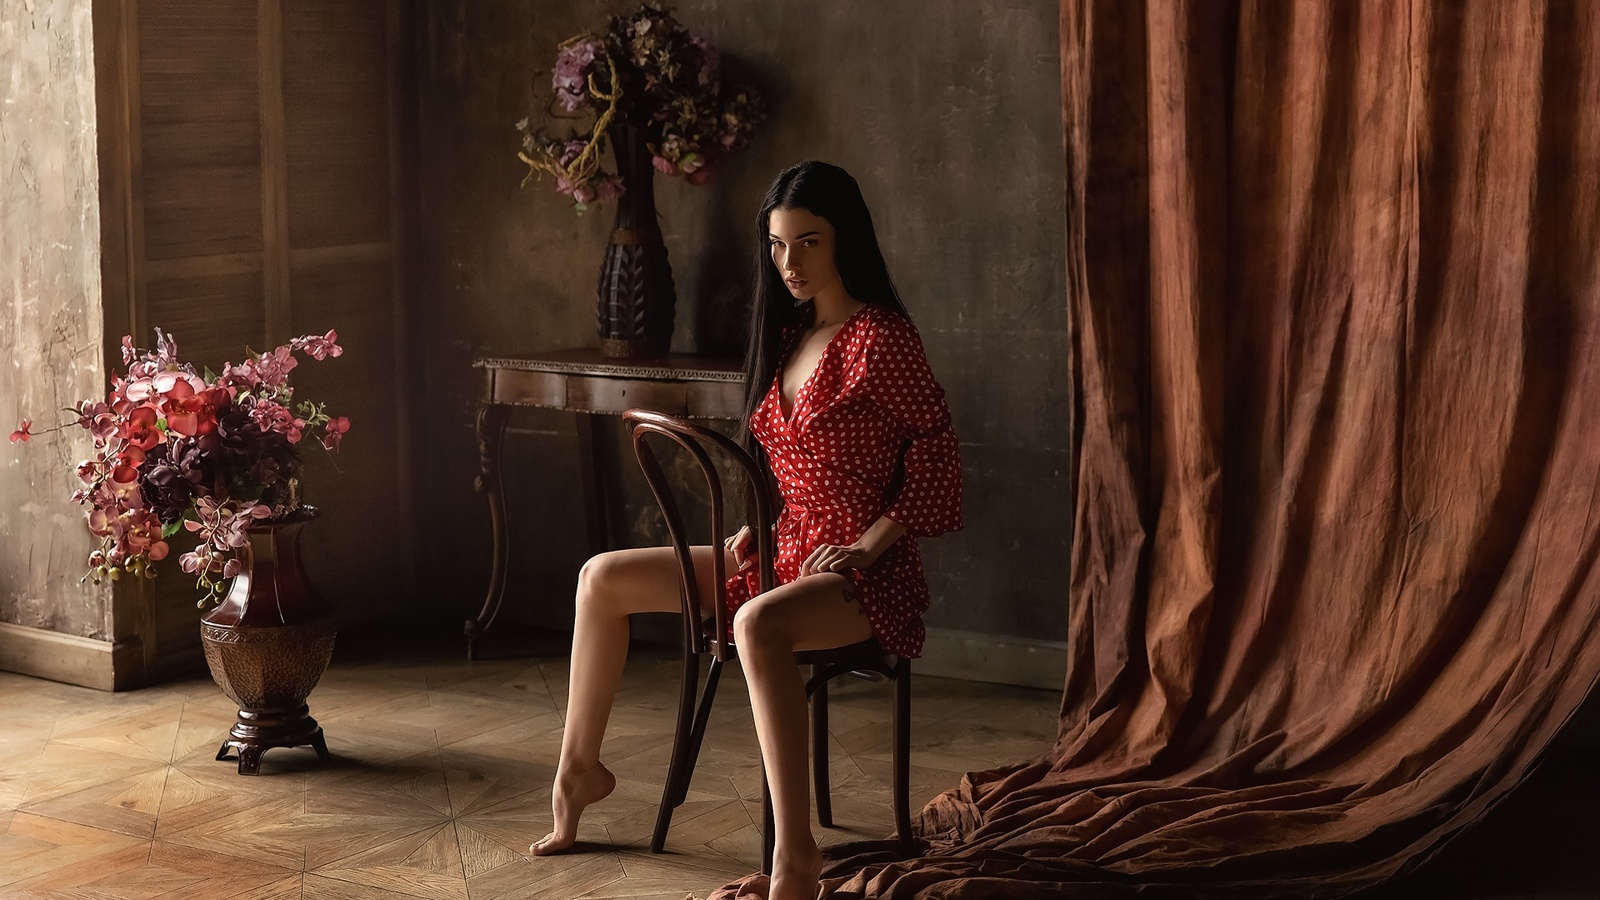 alla berger, women, chair, tattoo, sitting, polka dots, red dress, long hair, flowers, cleavage